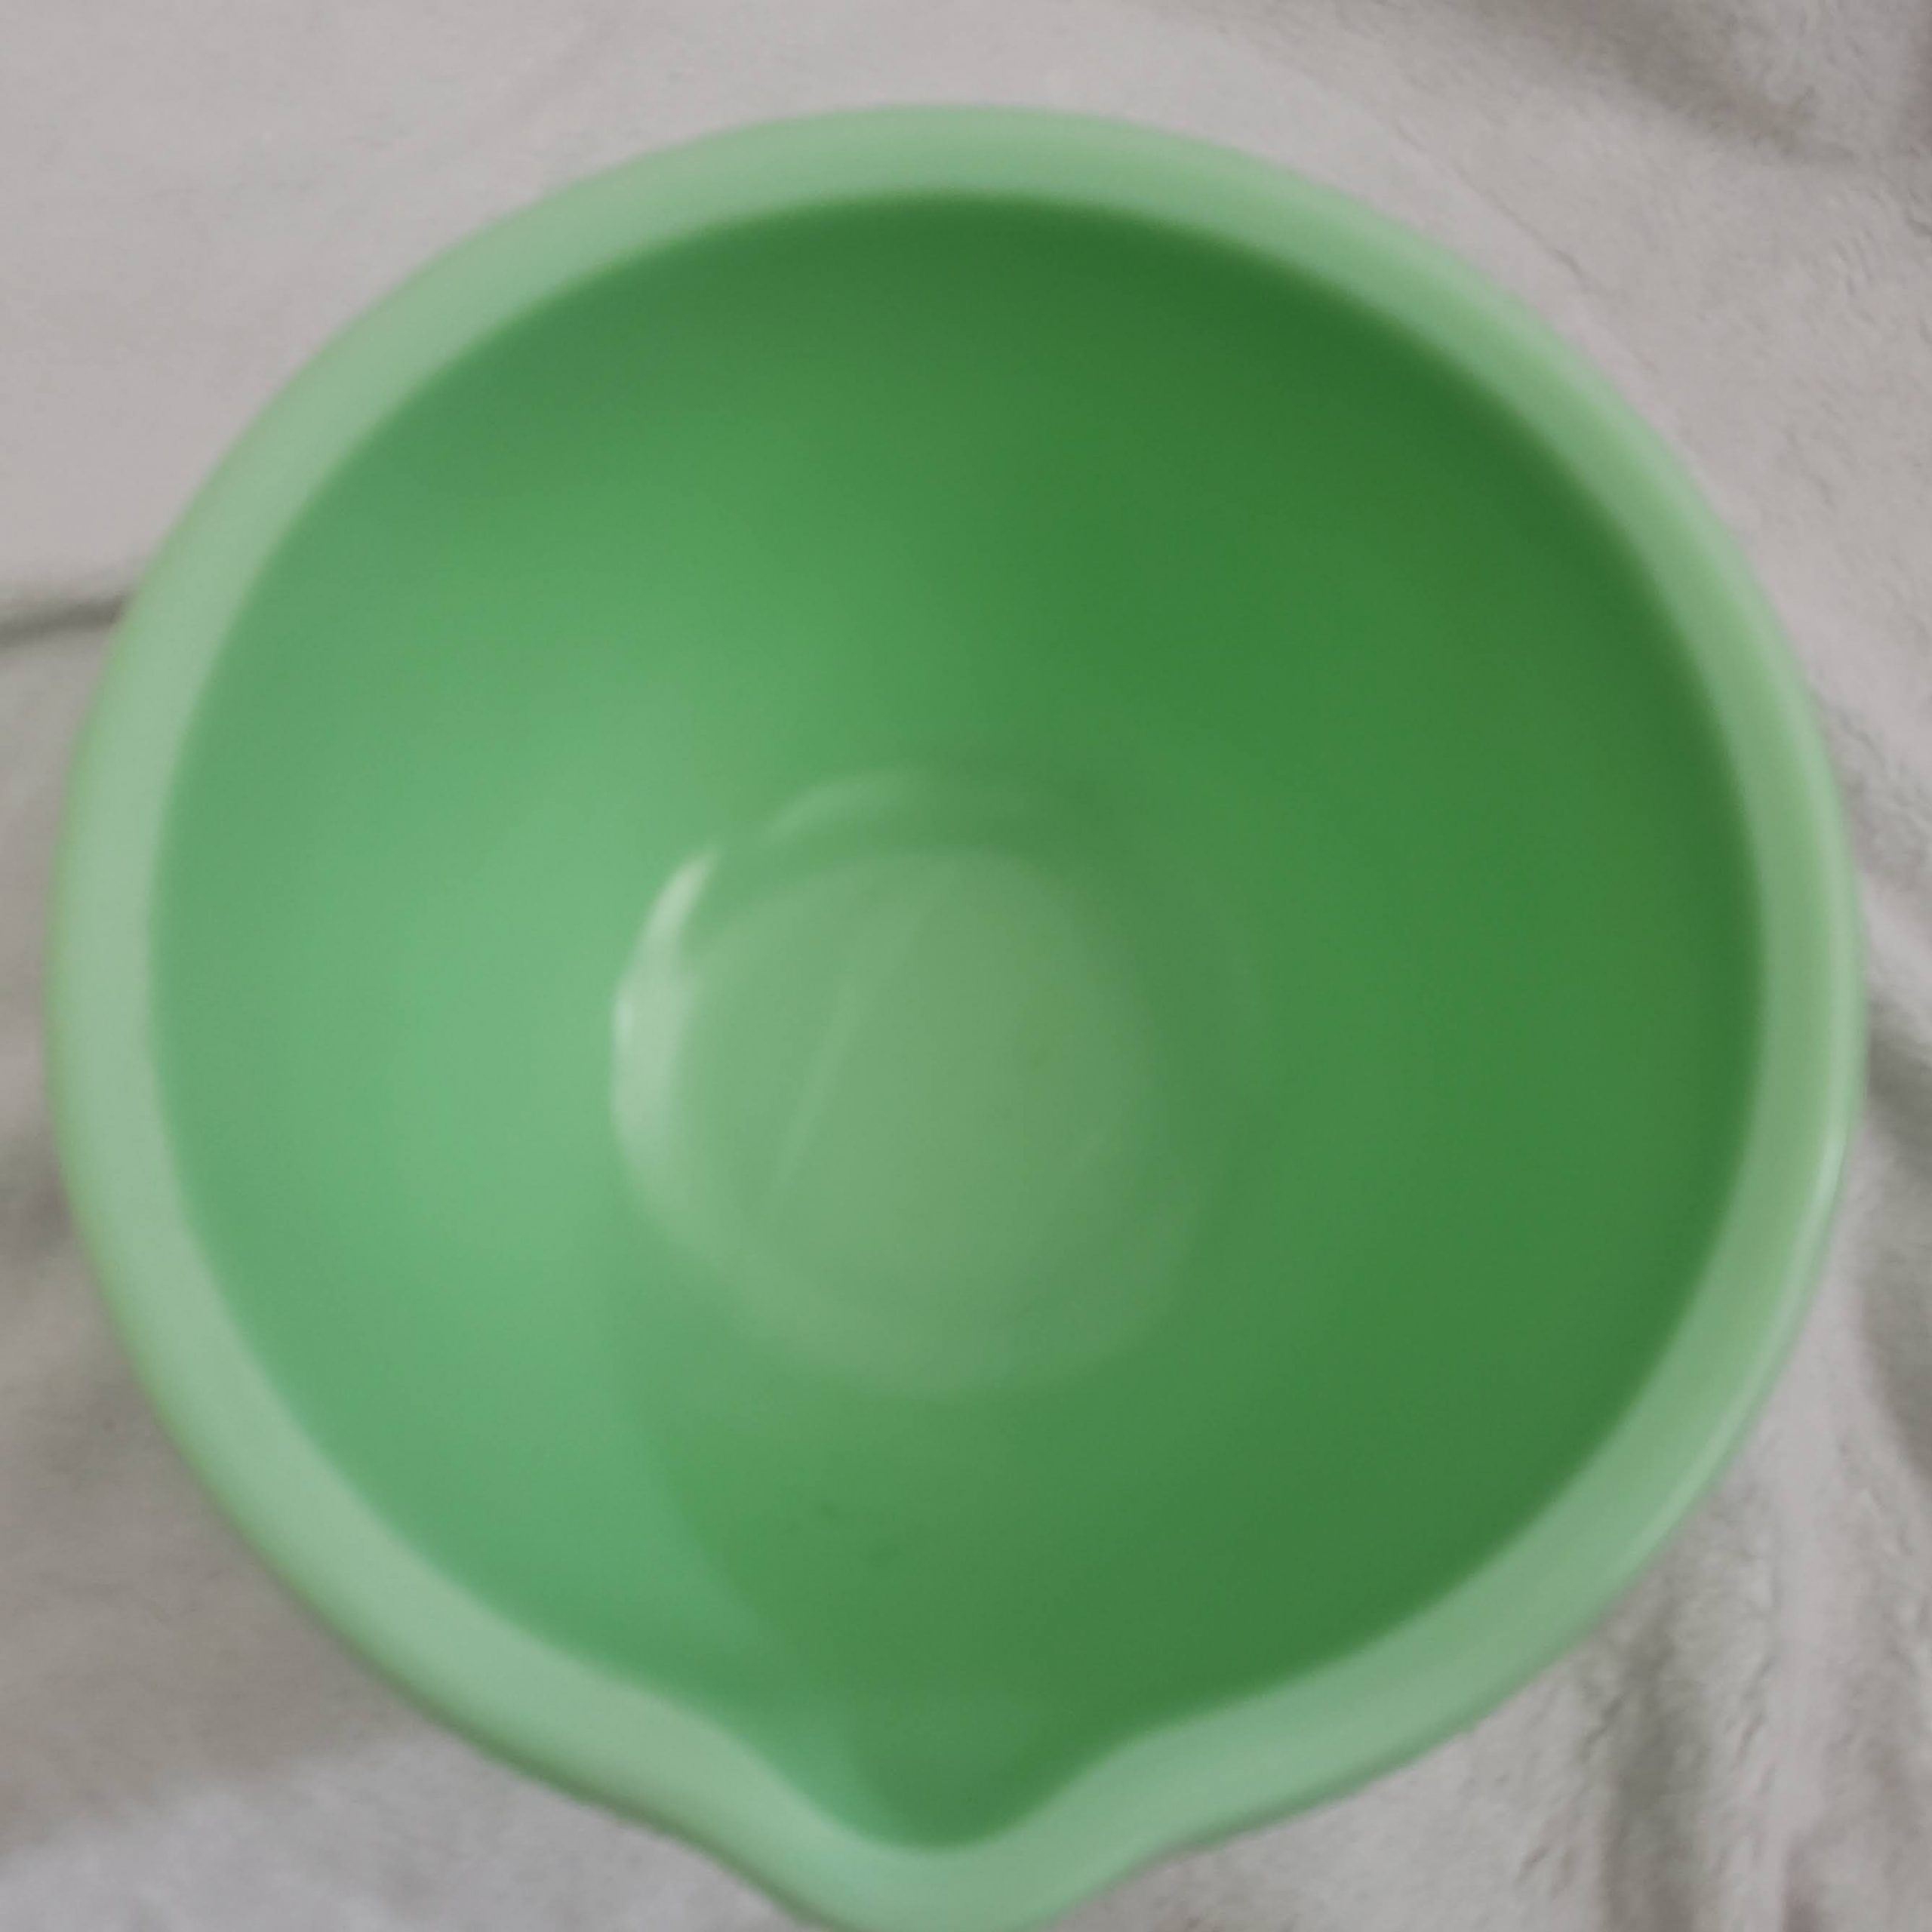 https://serstyle.com/wp-content/uploads/2020/03/vintage-mixing-bowl-jadeite-green-scaled.jpg